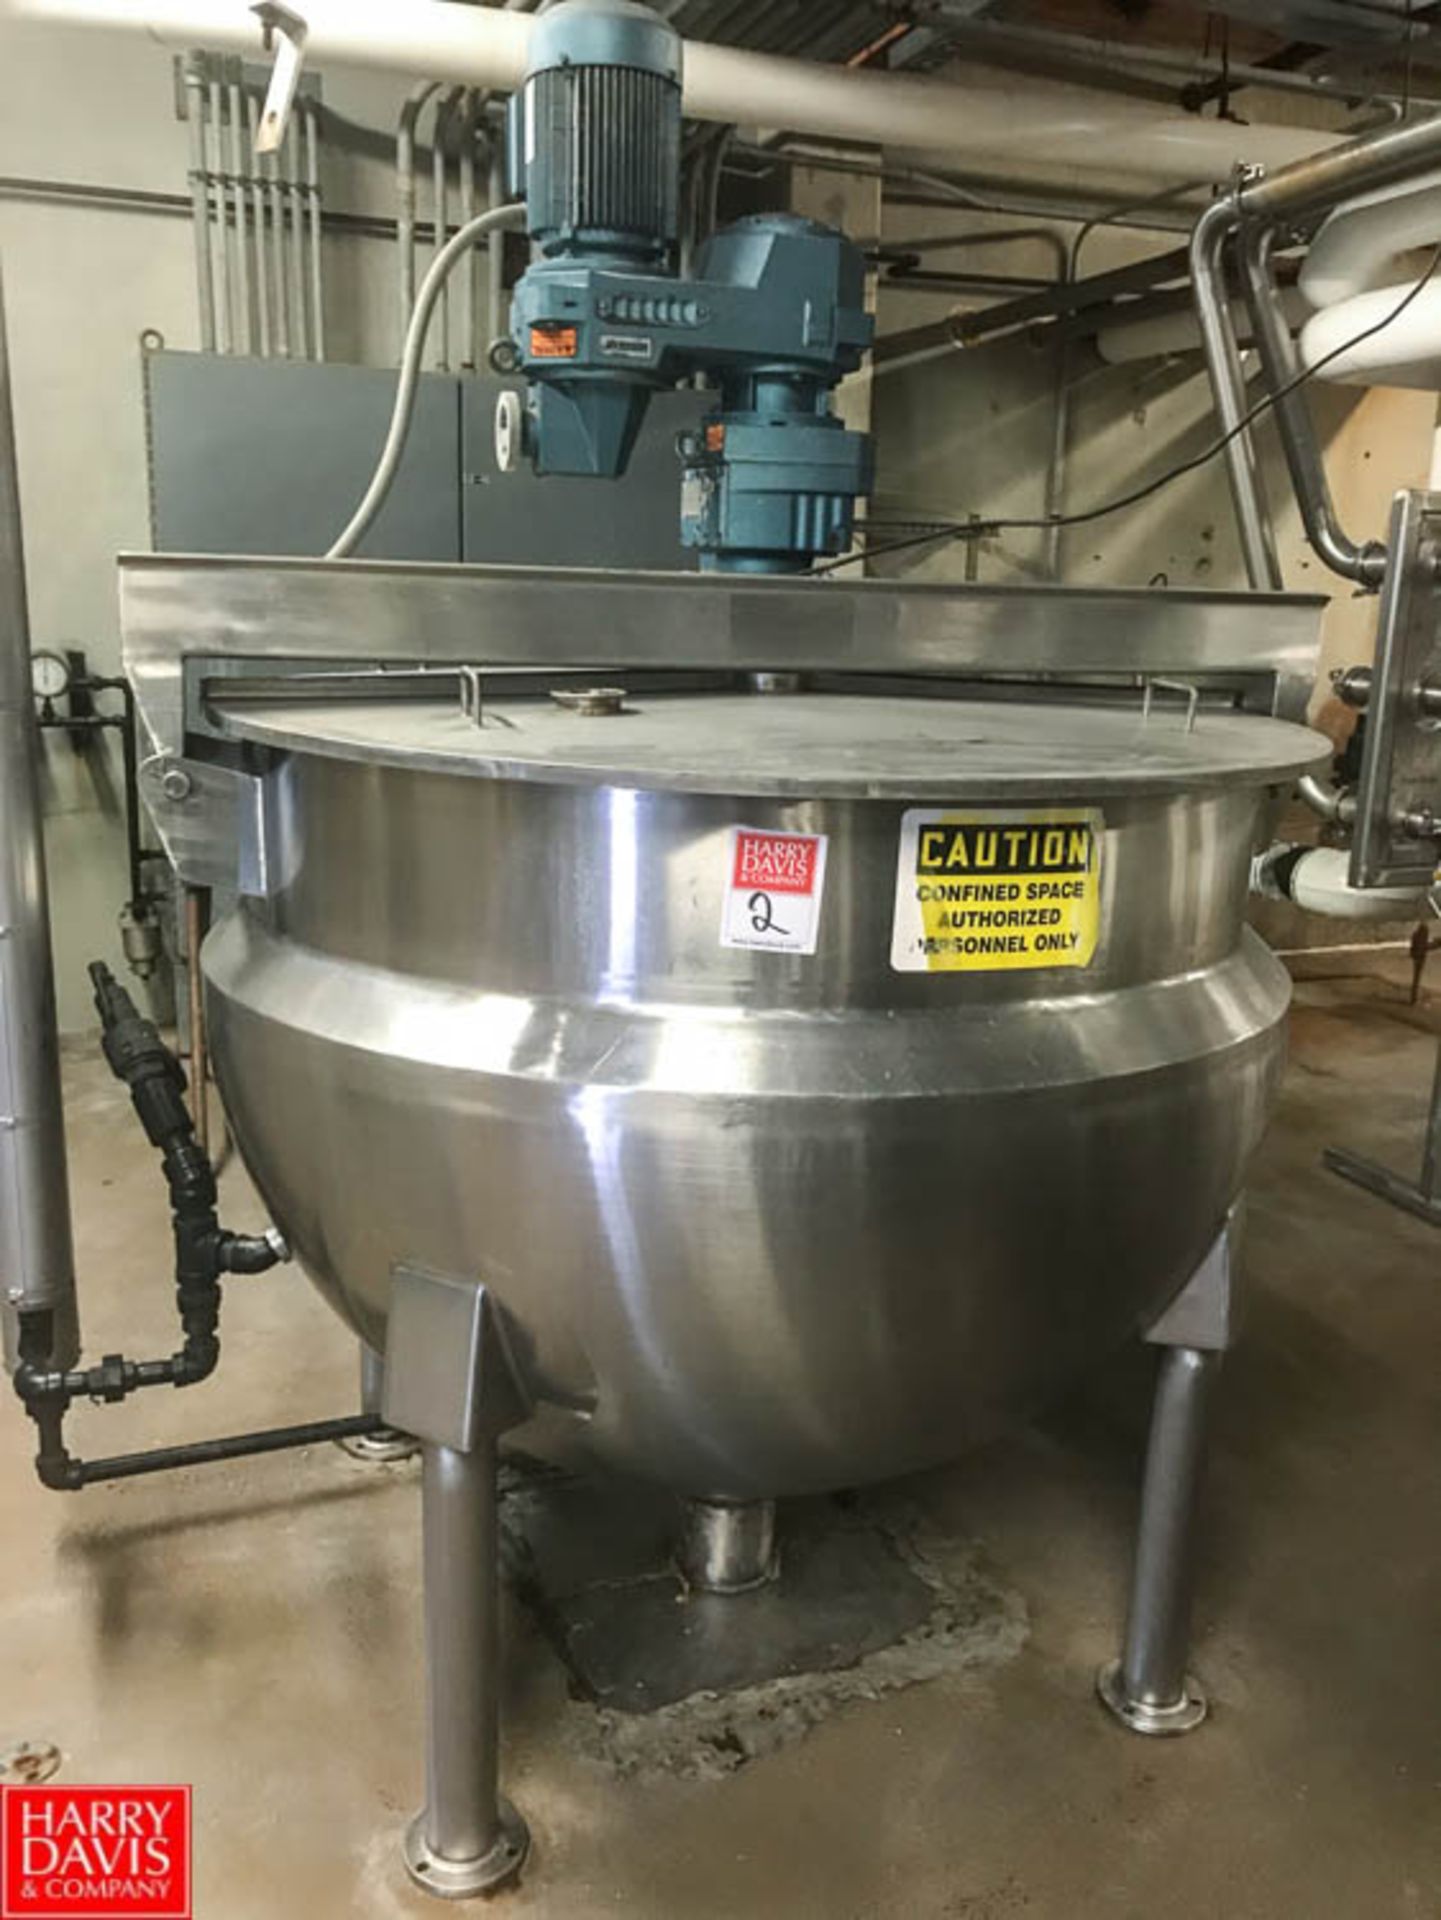 Hamilton 300 Gallon S/S Jacketed Kettle with Scrape Surface Agitation, S/N D-6542, 150 PSI Jacket